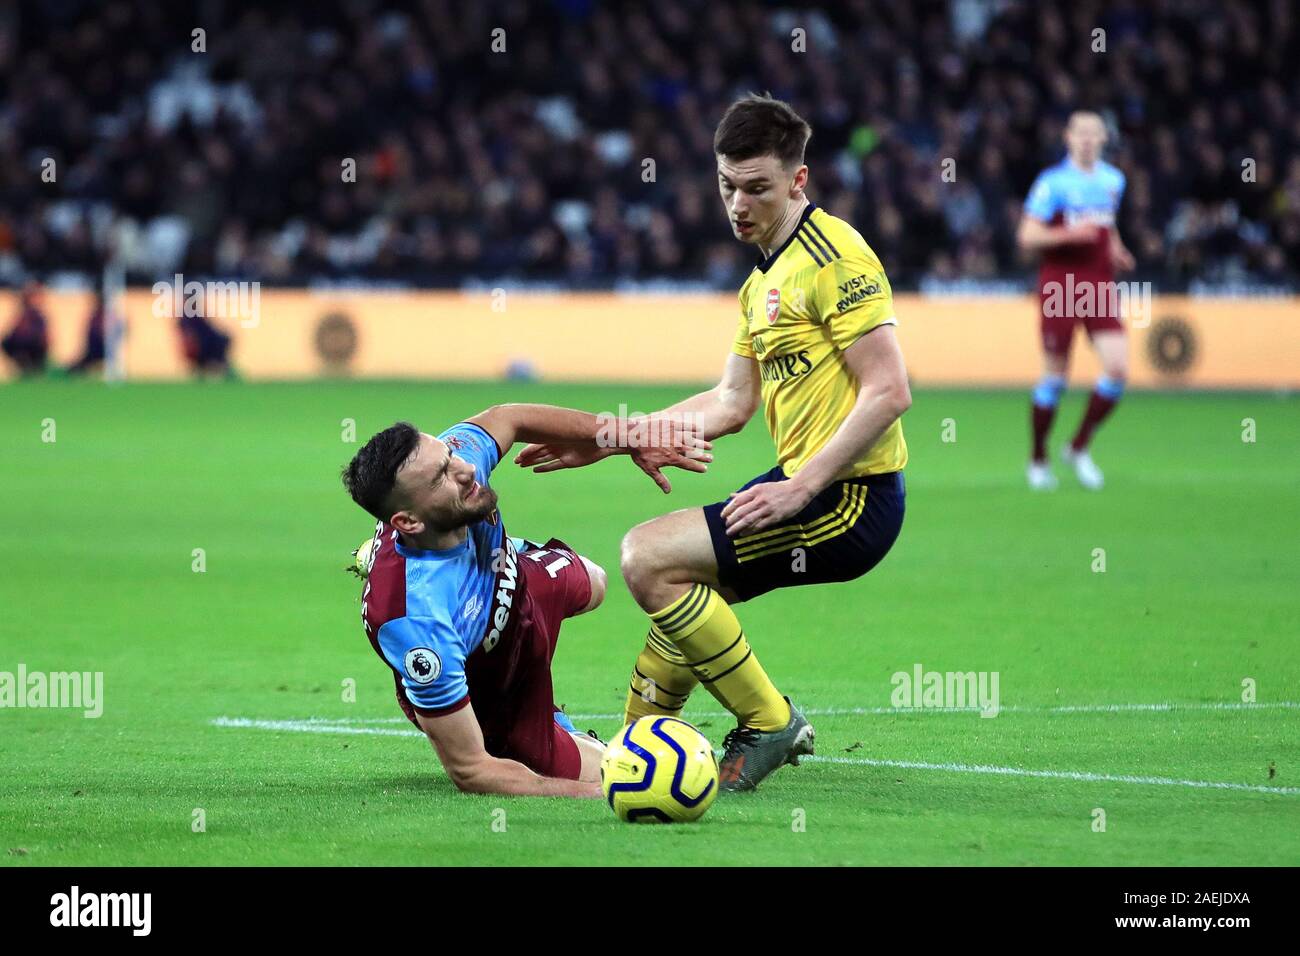 West Ham United's Robert Snodgrass (left) and Arsenal's Kieran Tierney battle for the ball during the Premier League match at the London Stadium, London. Stock Photo